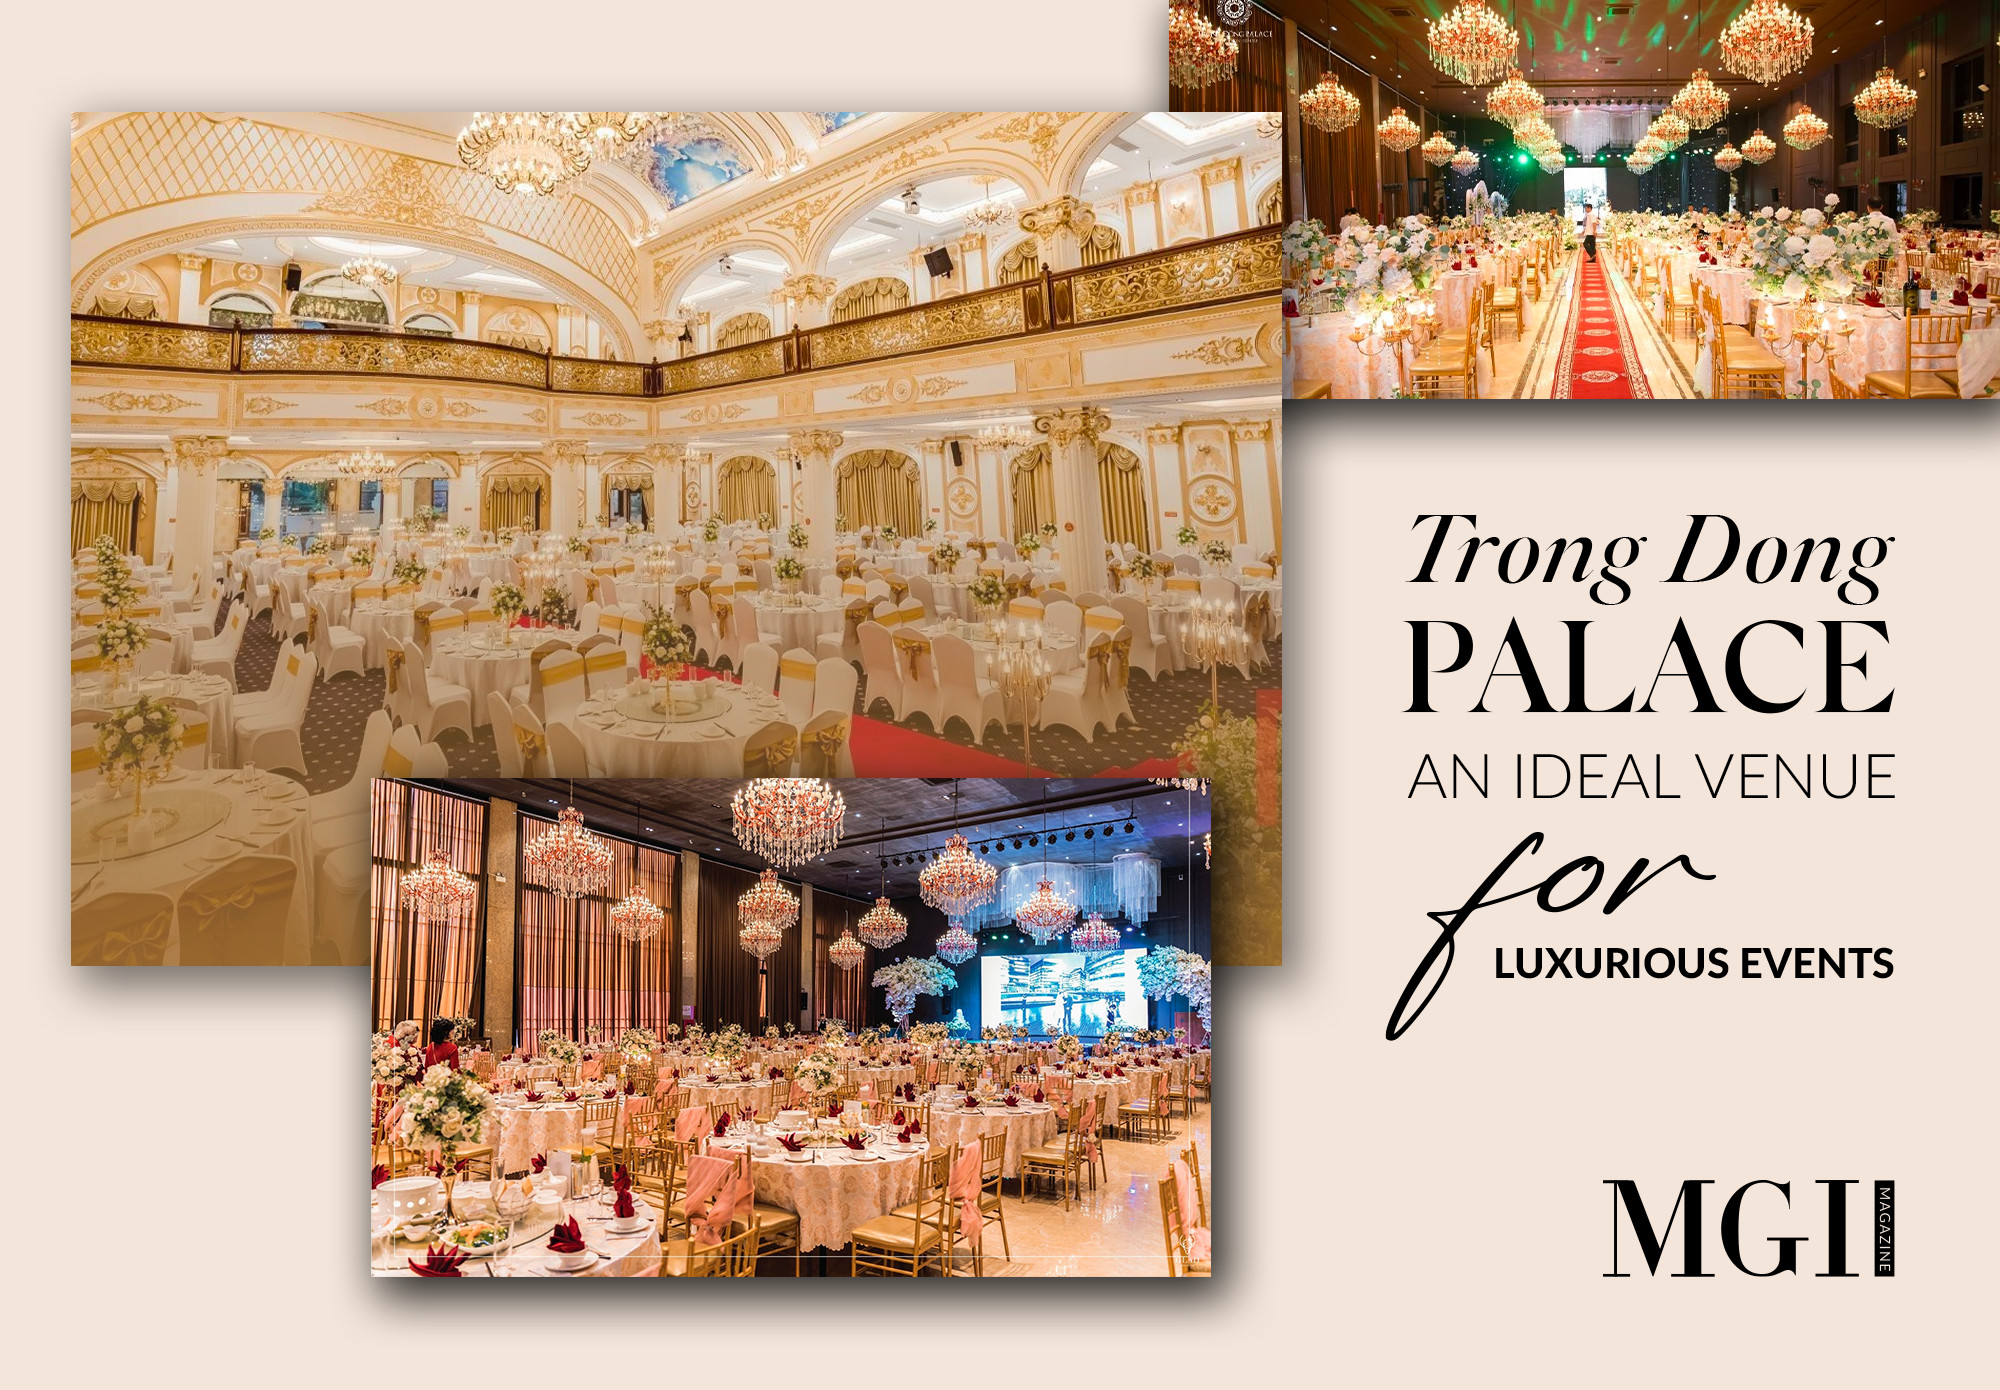 Trong Dong Palace - the ideal venue for luxurious events